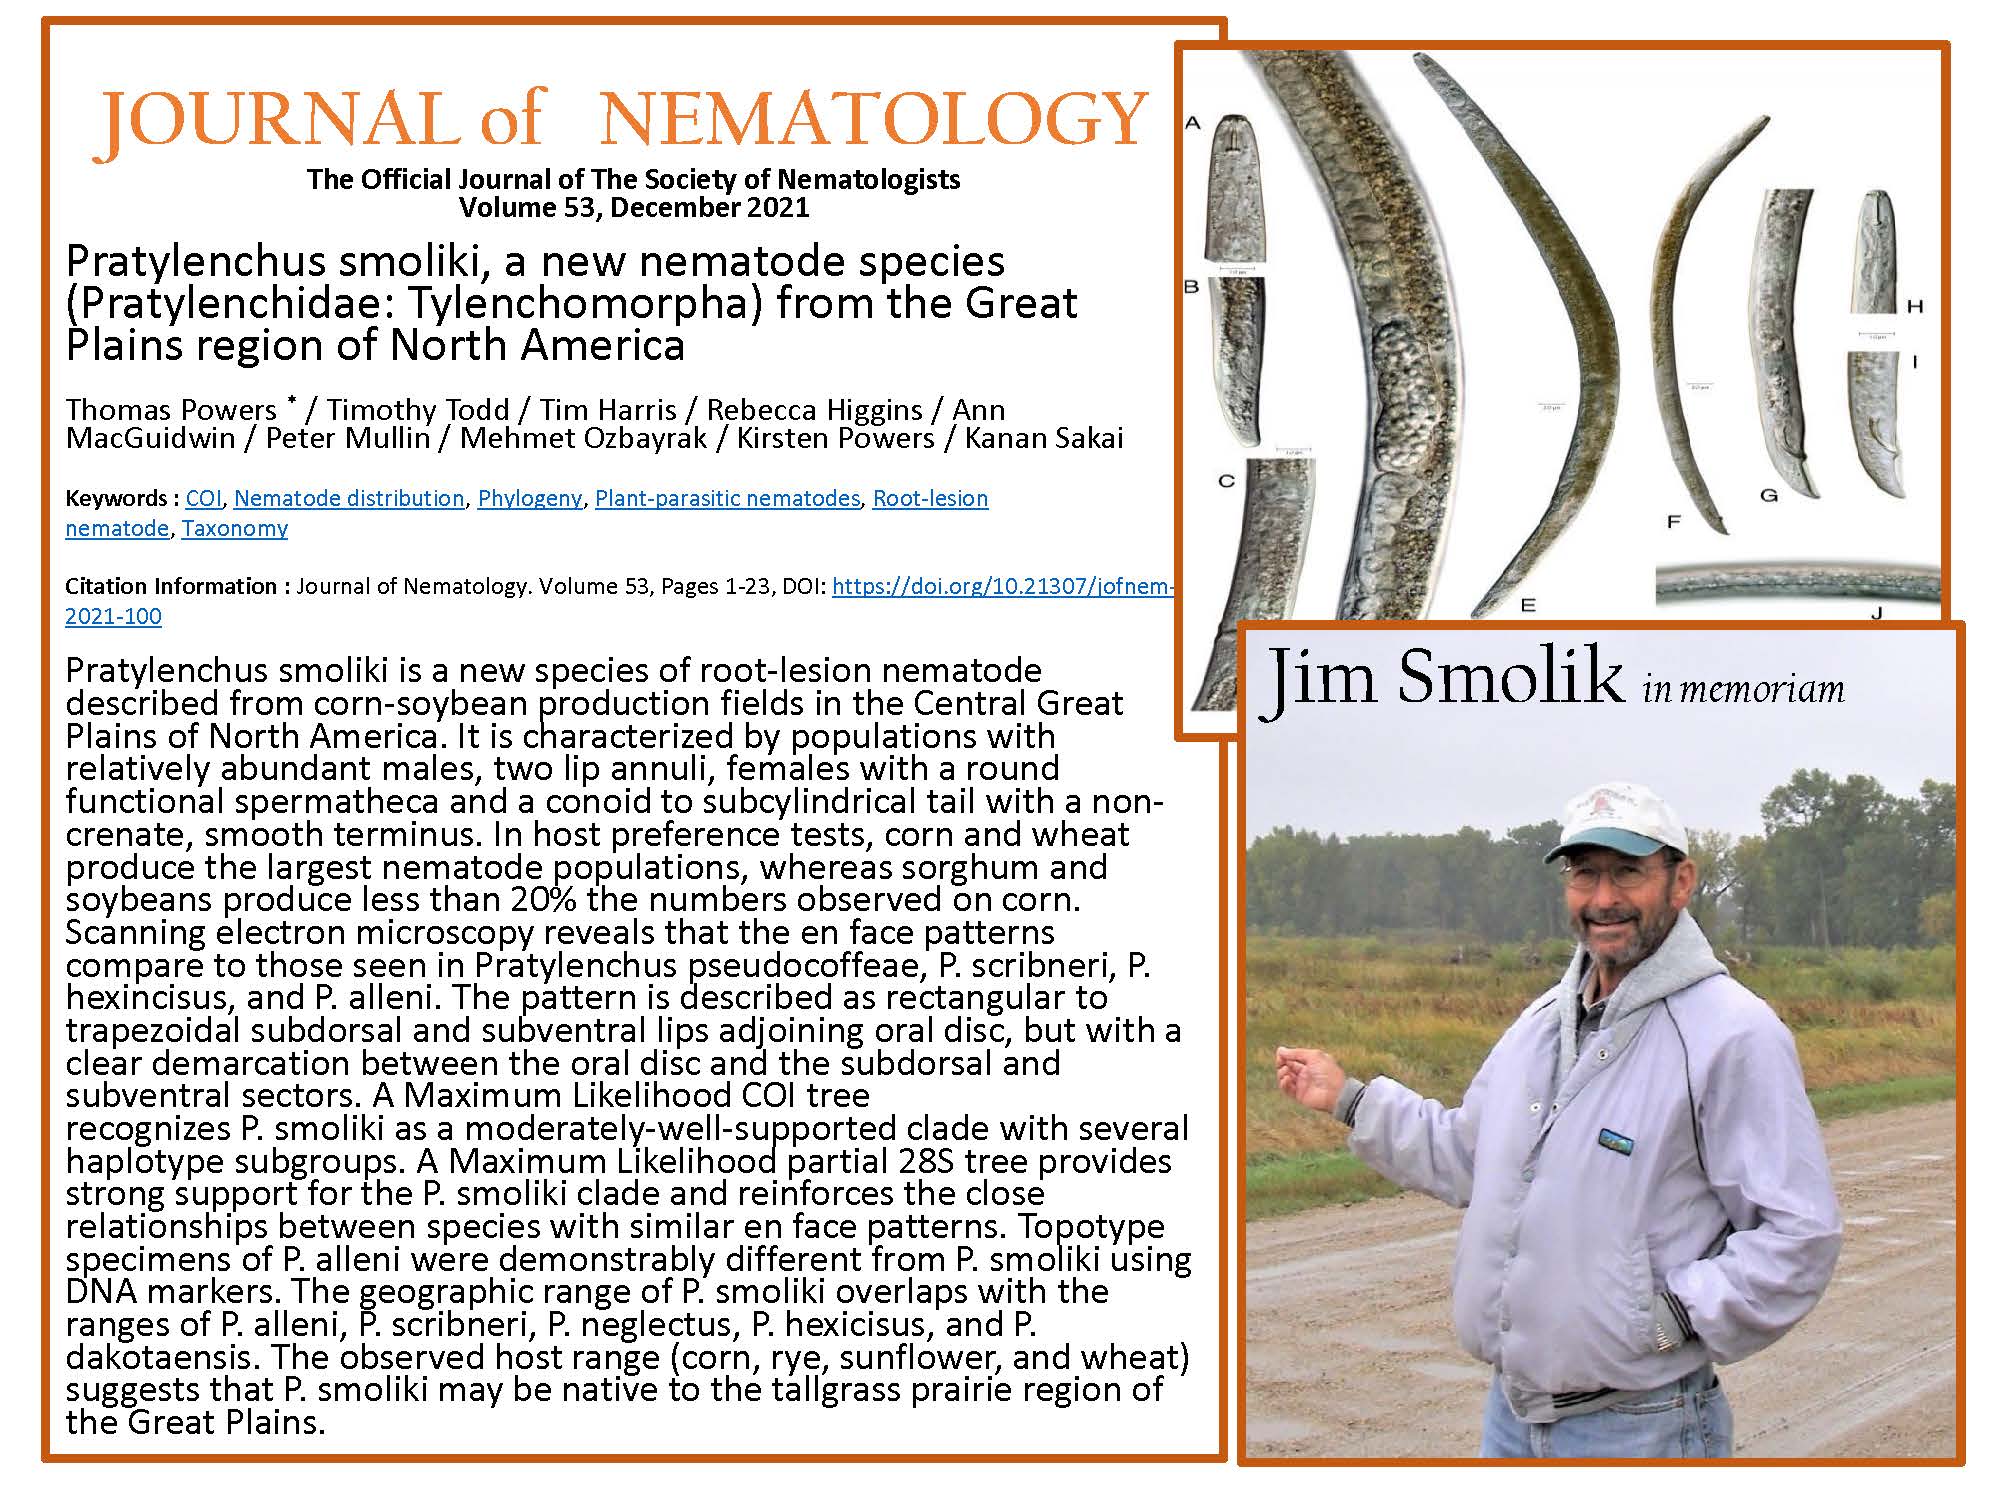 Collage photo with abstract of Powers' paper, photo of Pratylenchus smoliki, and photo of the late Jim Smolik